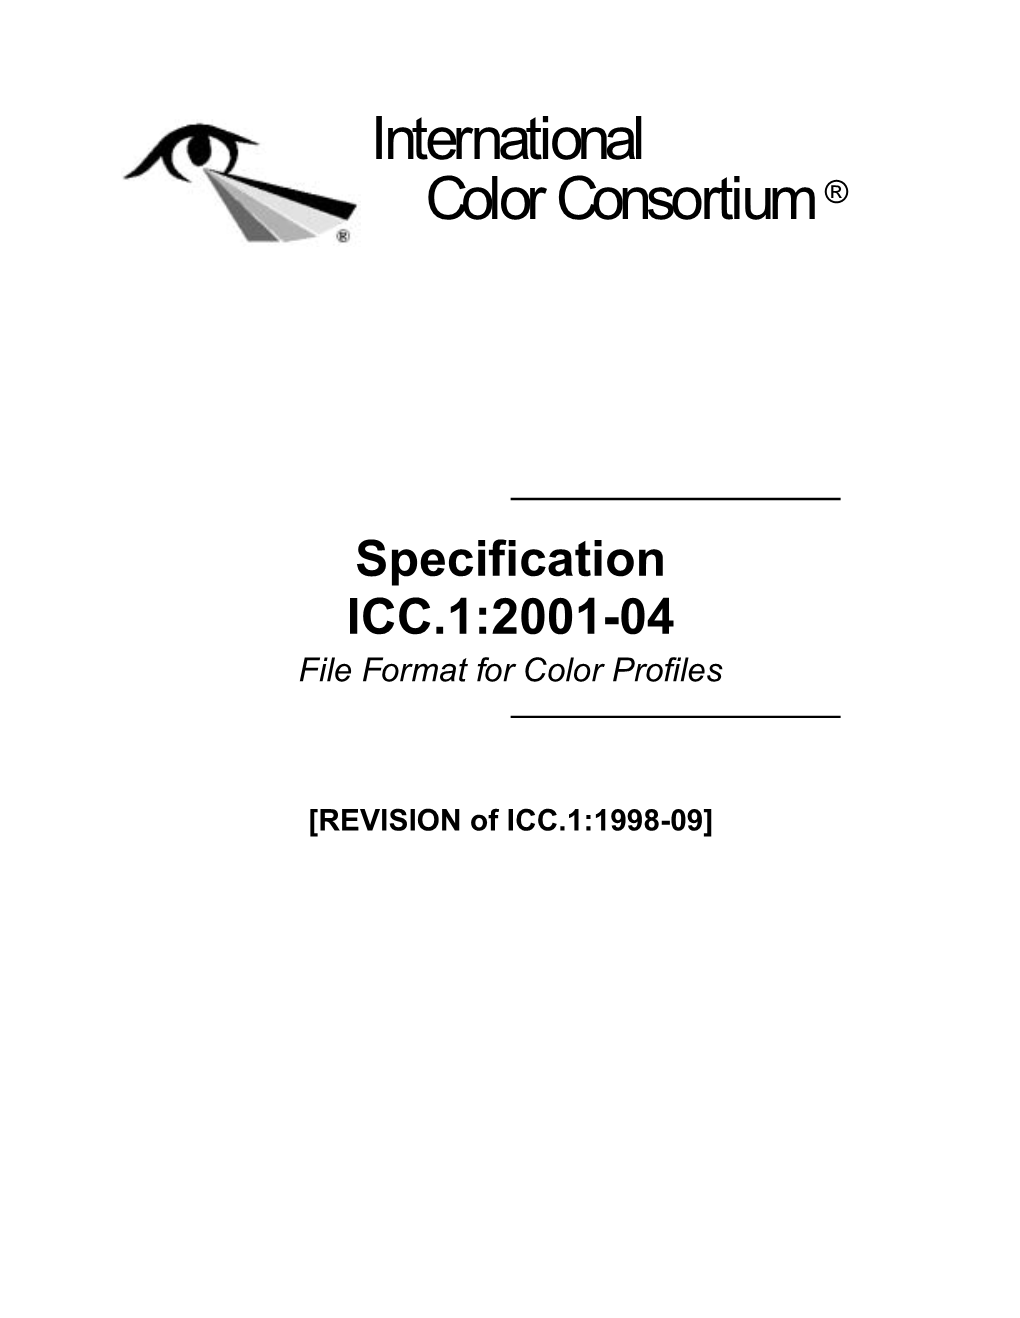 ICC.1:2001-04 File Format for Color Profiles